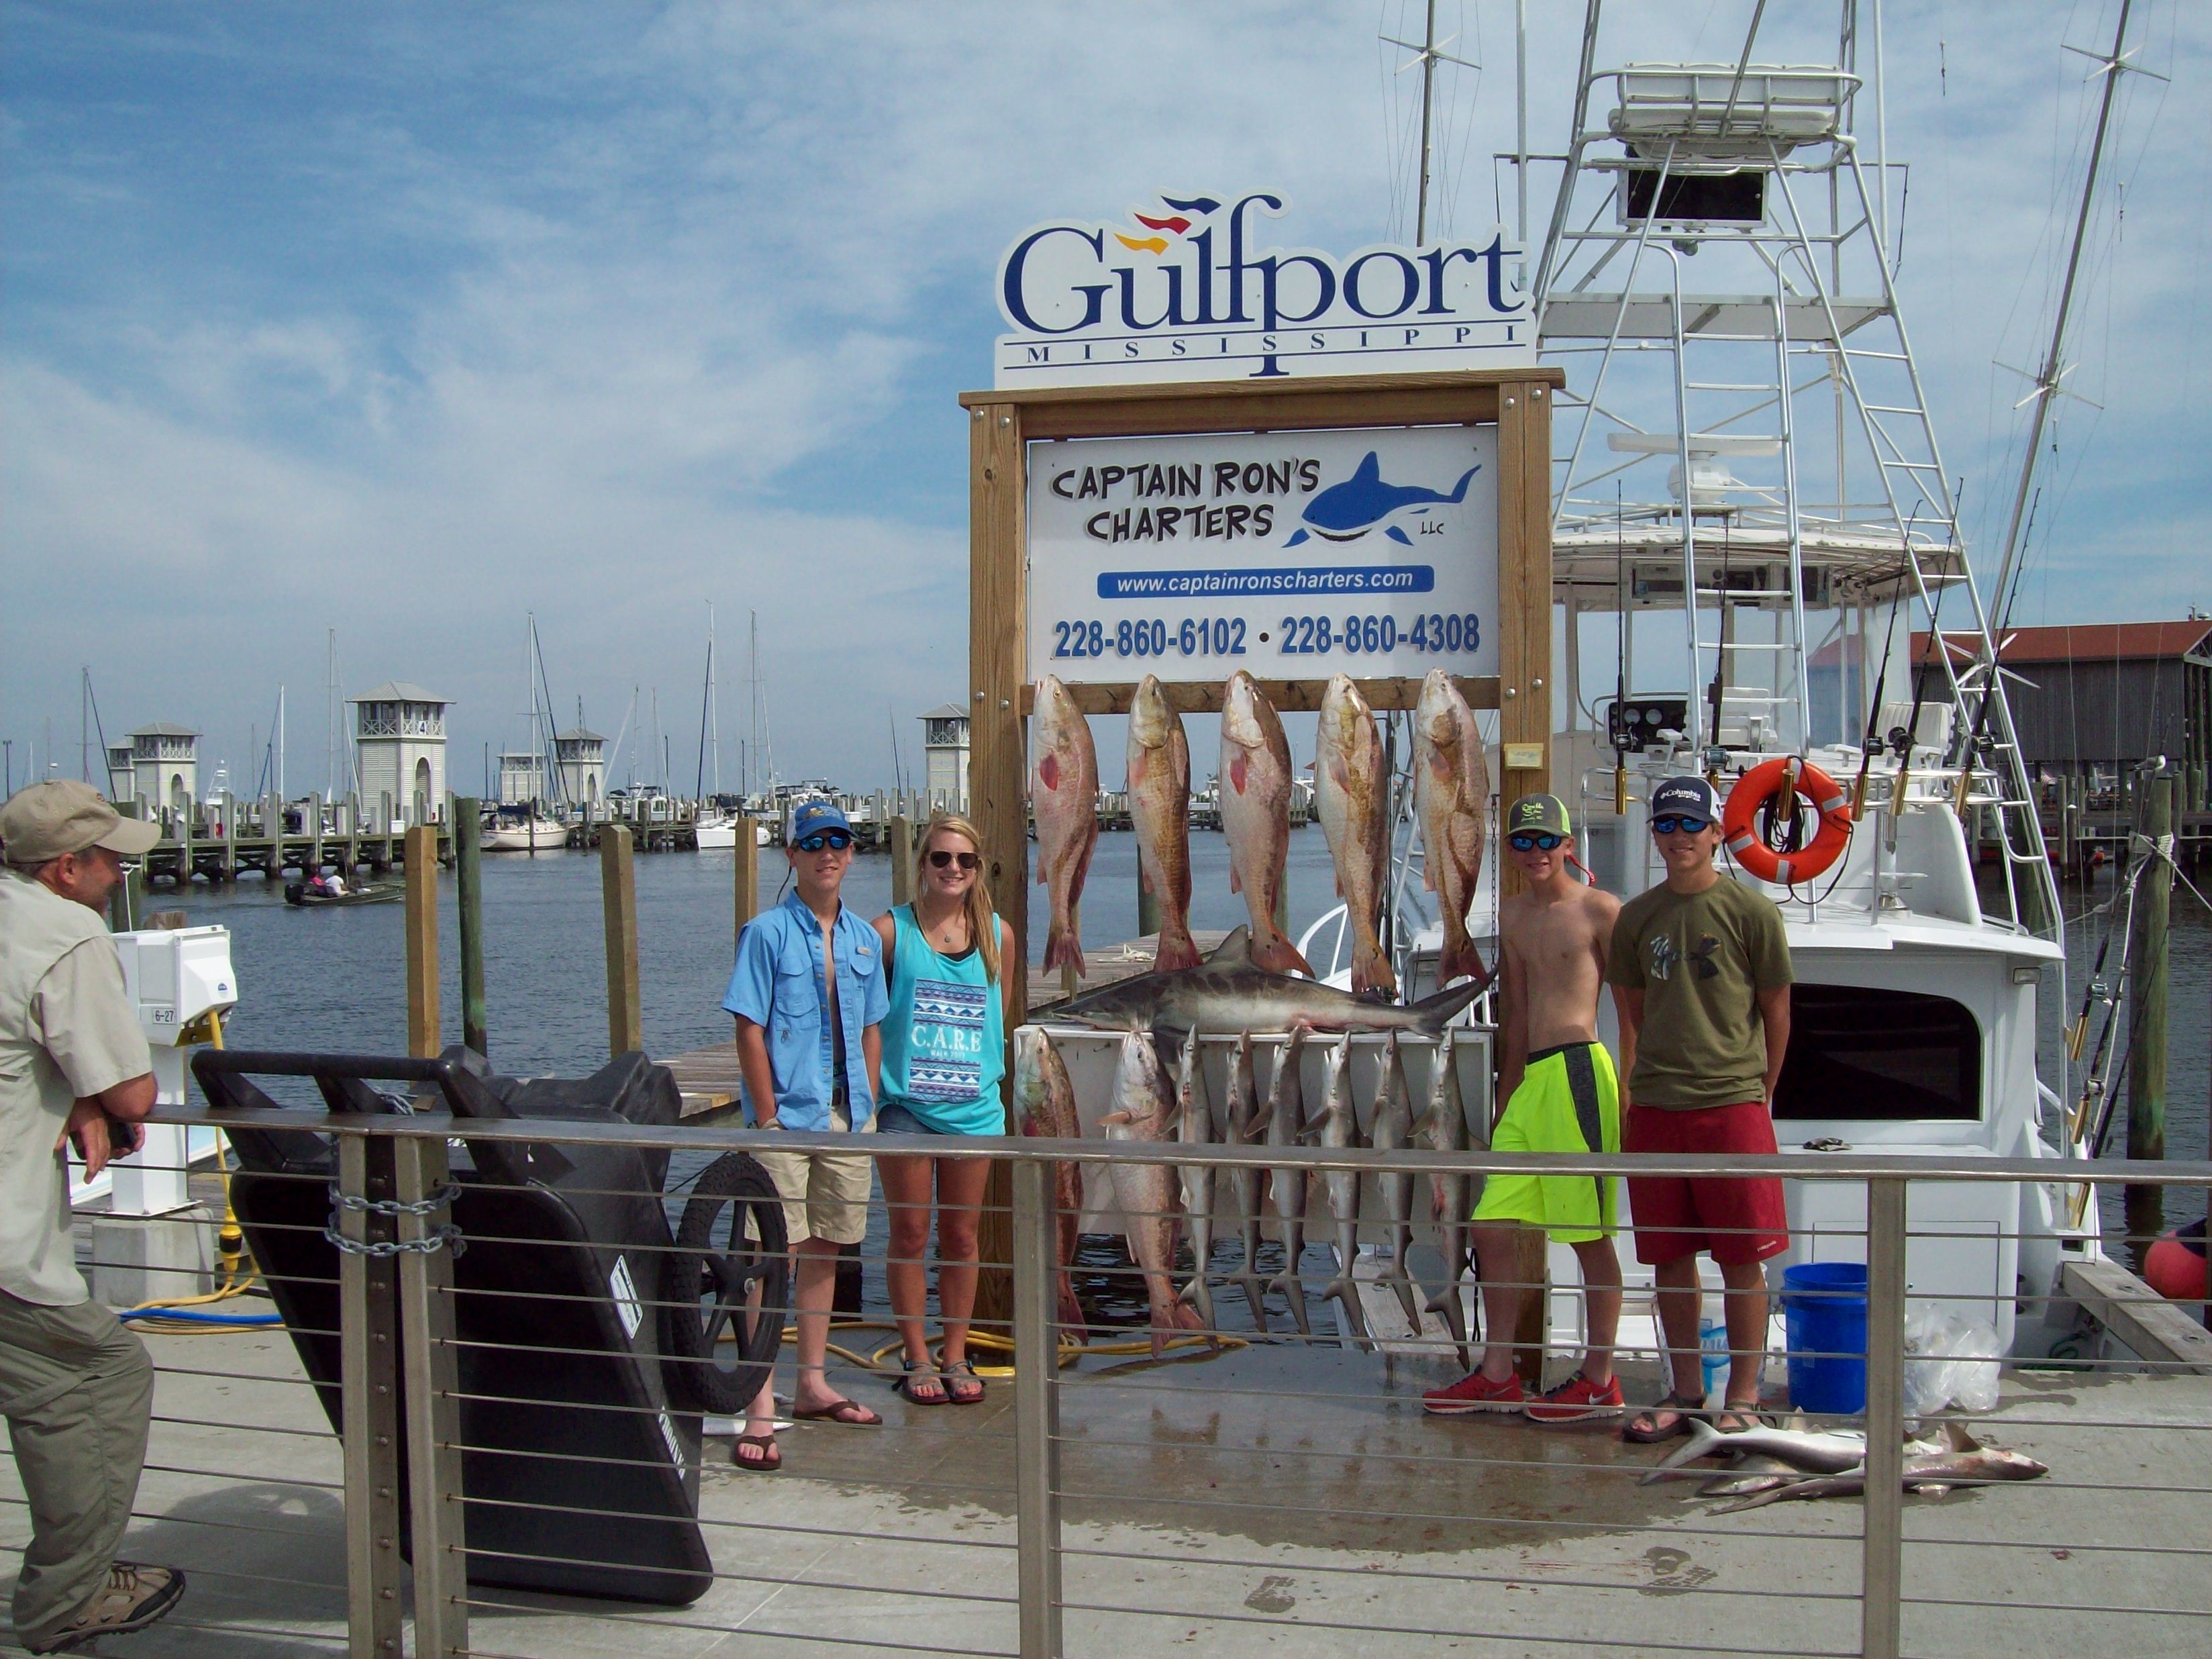 Captain Ron's Charters Mississippi: "On strike" 8 Hour Full Day Offshore